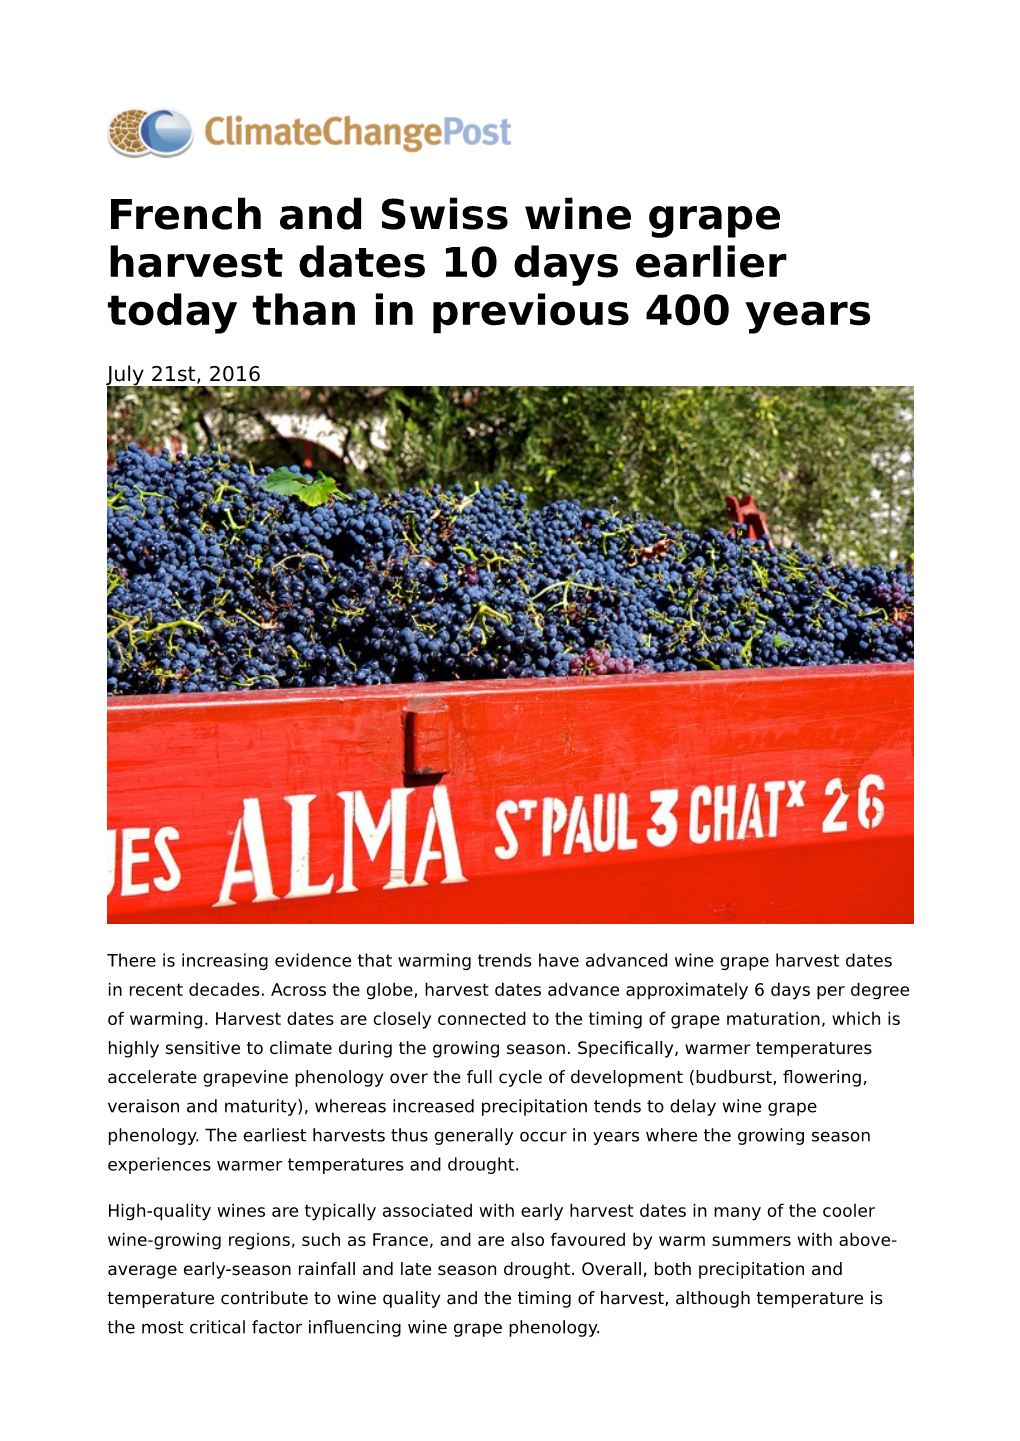 French and Swiss Wine Grape Harvest Dates 10 Days Earlier Today Than in Previous 400 Years